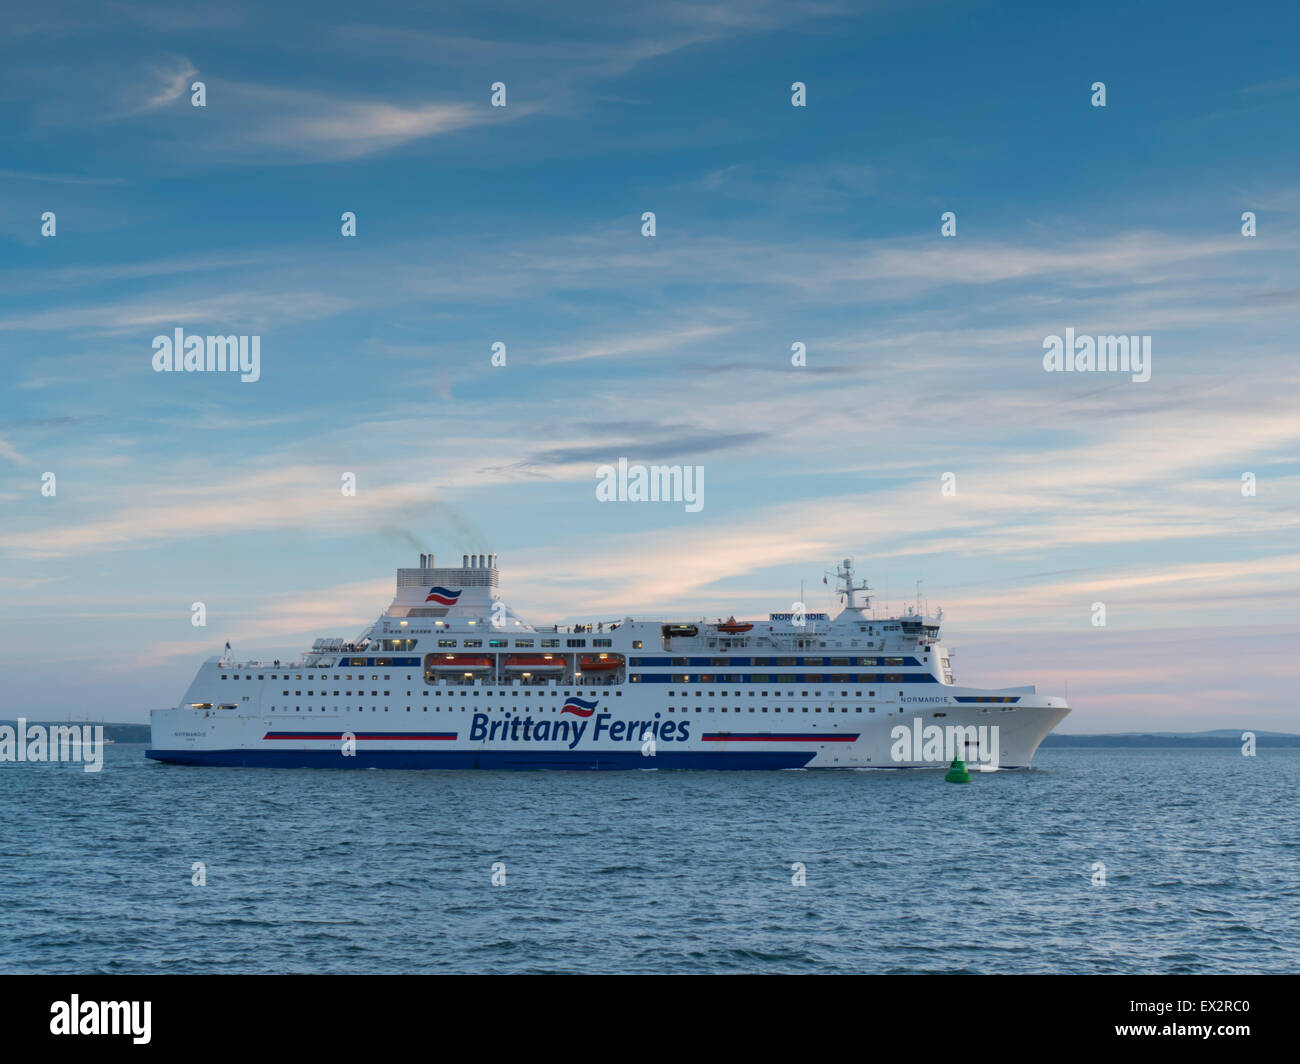 Brittany Ferries Ferry Banque D'Images